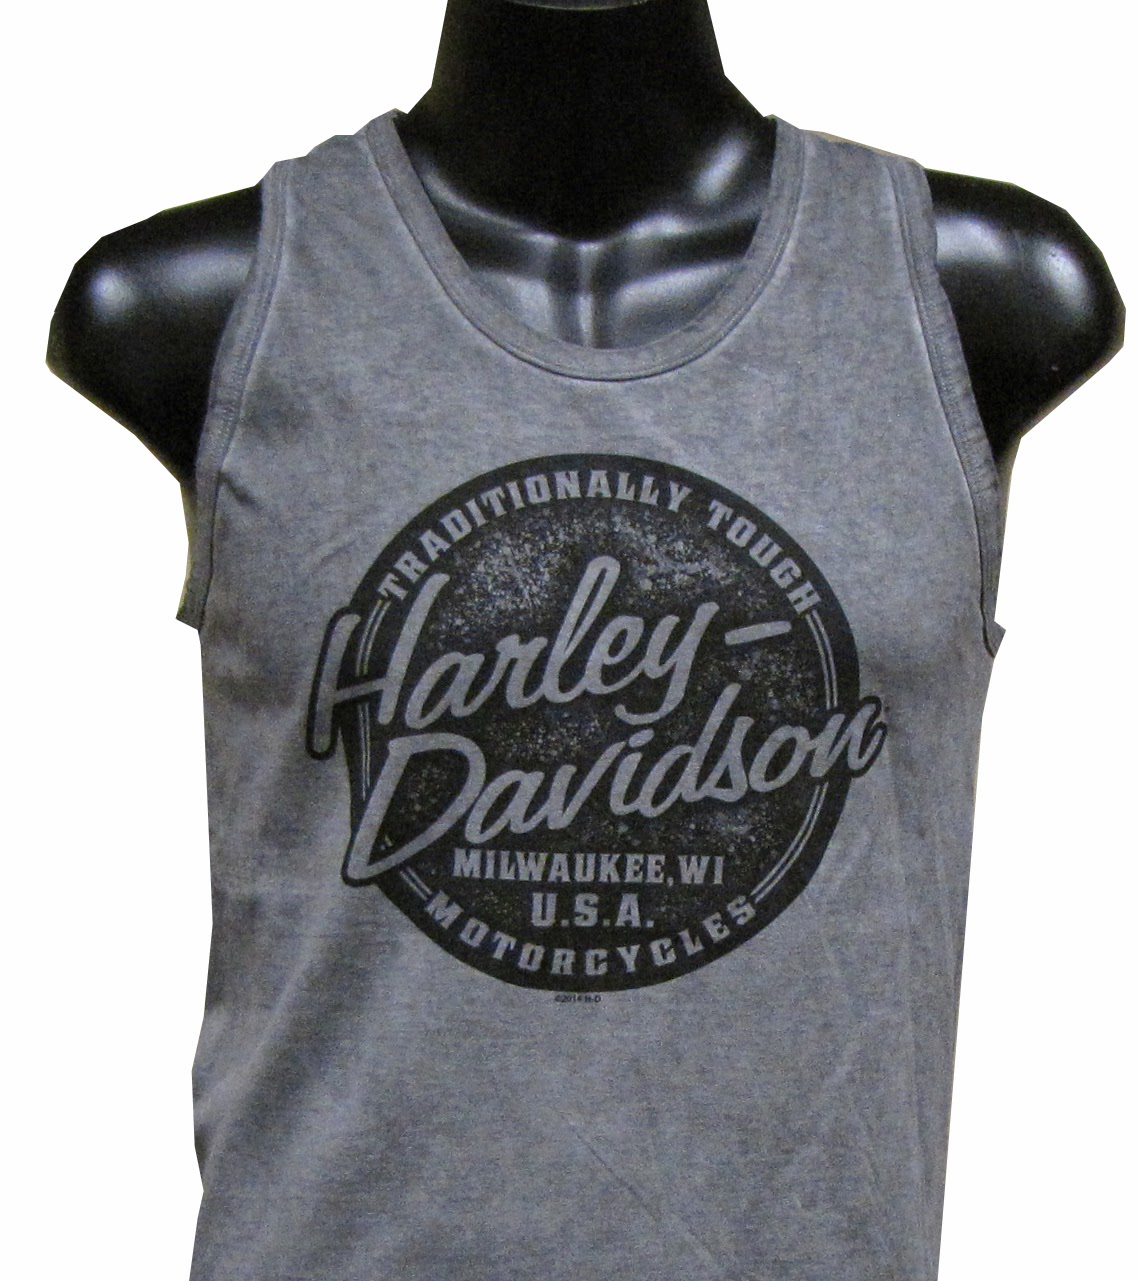 http://www.adventureharley.com/harley-davidson-muscle-tank-mens-round-traditional-dyed-tank-gray